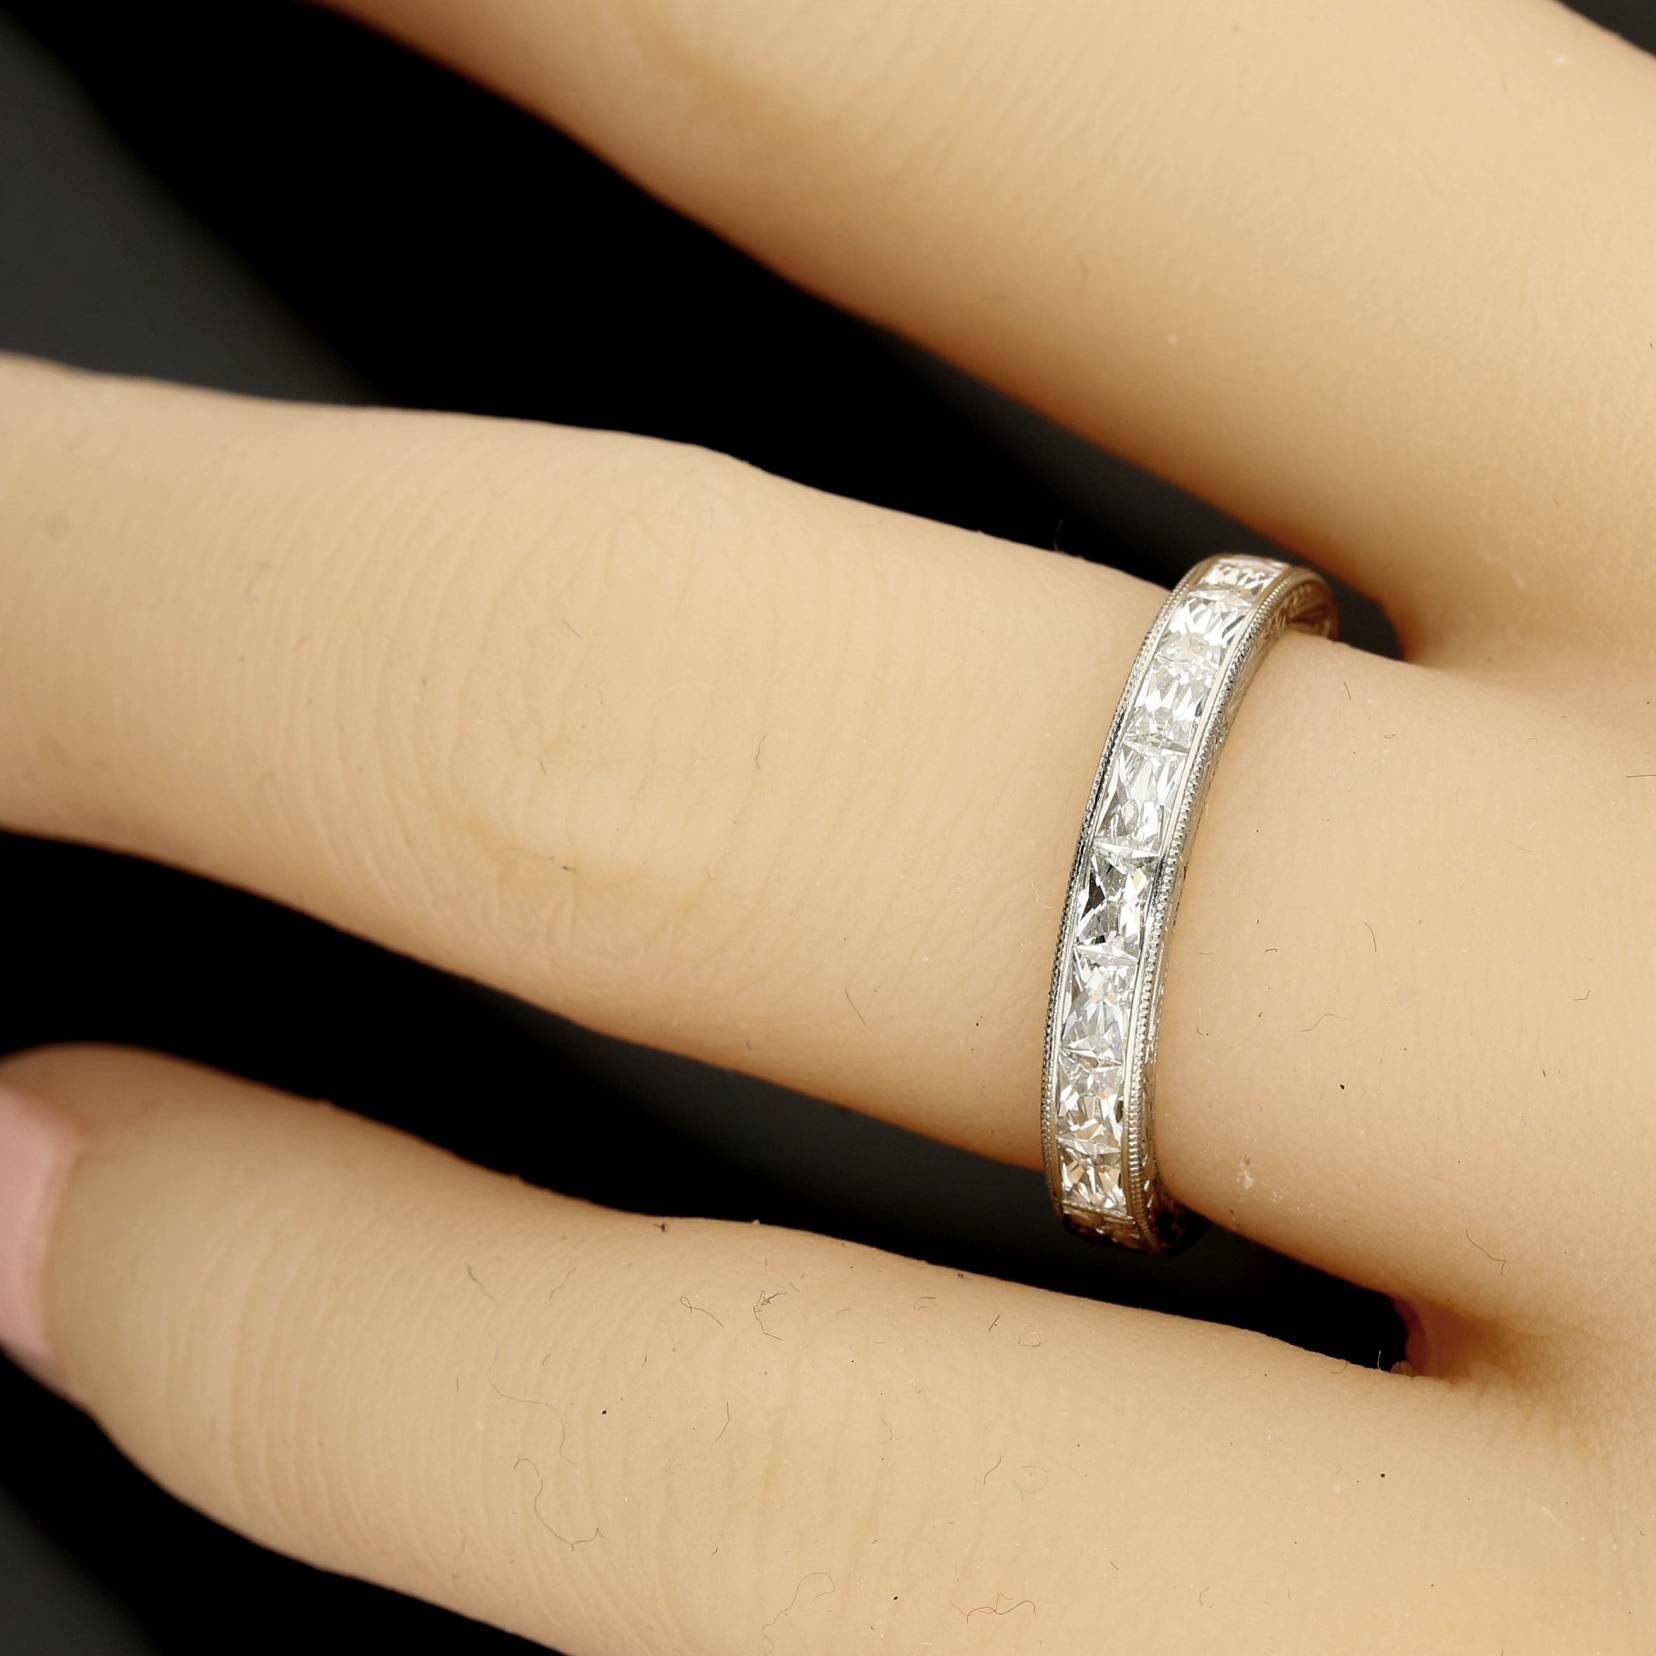 The ring is 3/4 set with rectangular French cut diamonds, channel set in decoratively hand-engraved platinum.
15x rectangular French cut diamonds of G colour and VS clarity with a combined weight of 1.18cts.
UK finger size L1/2 (resizeable). Or